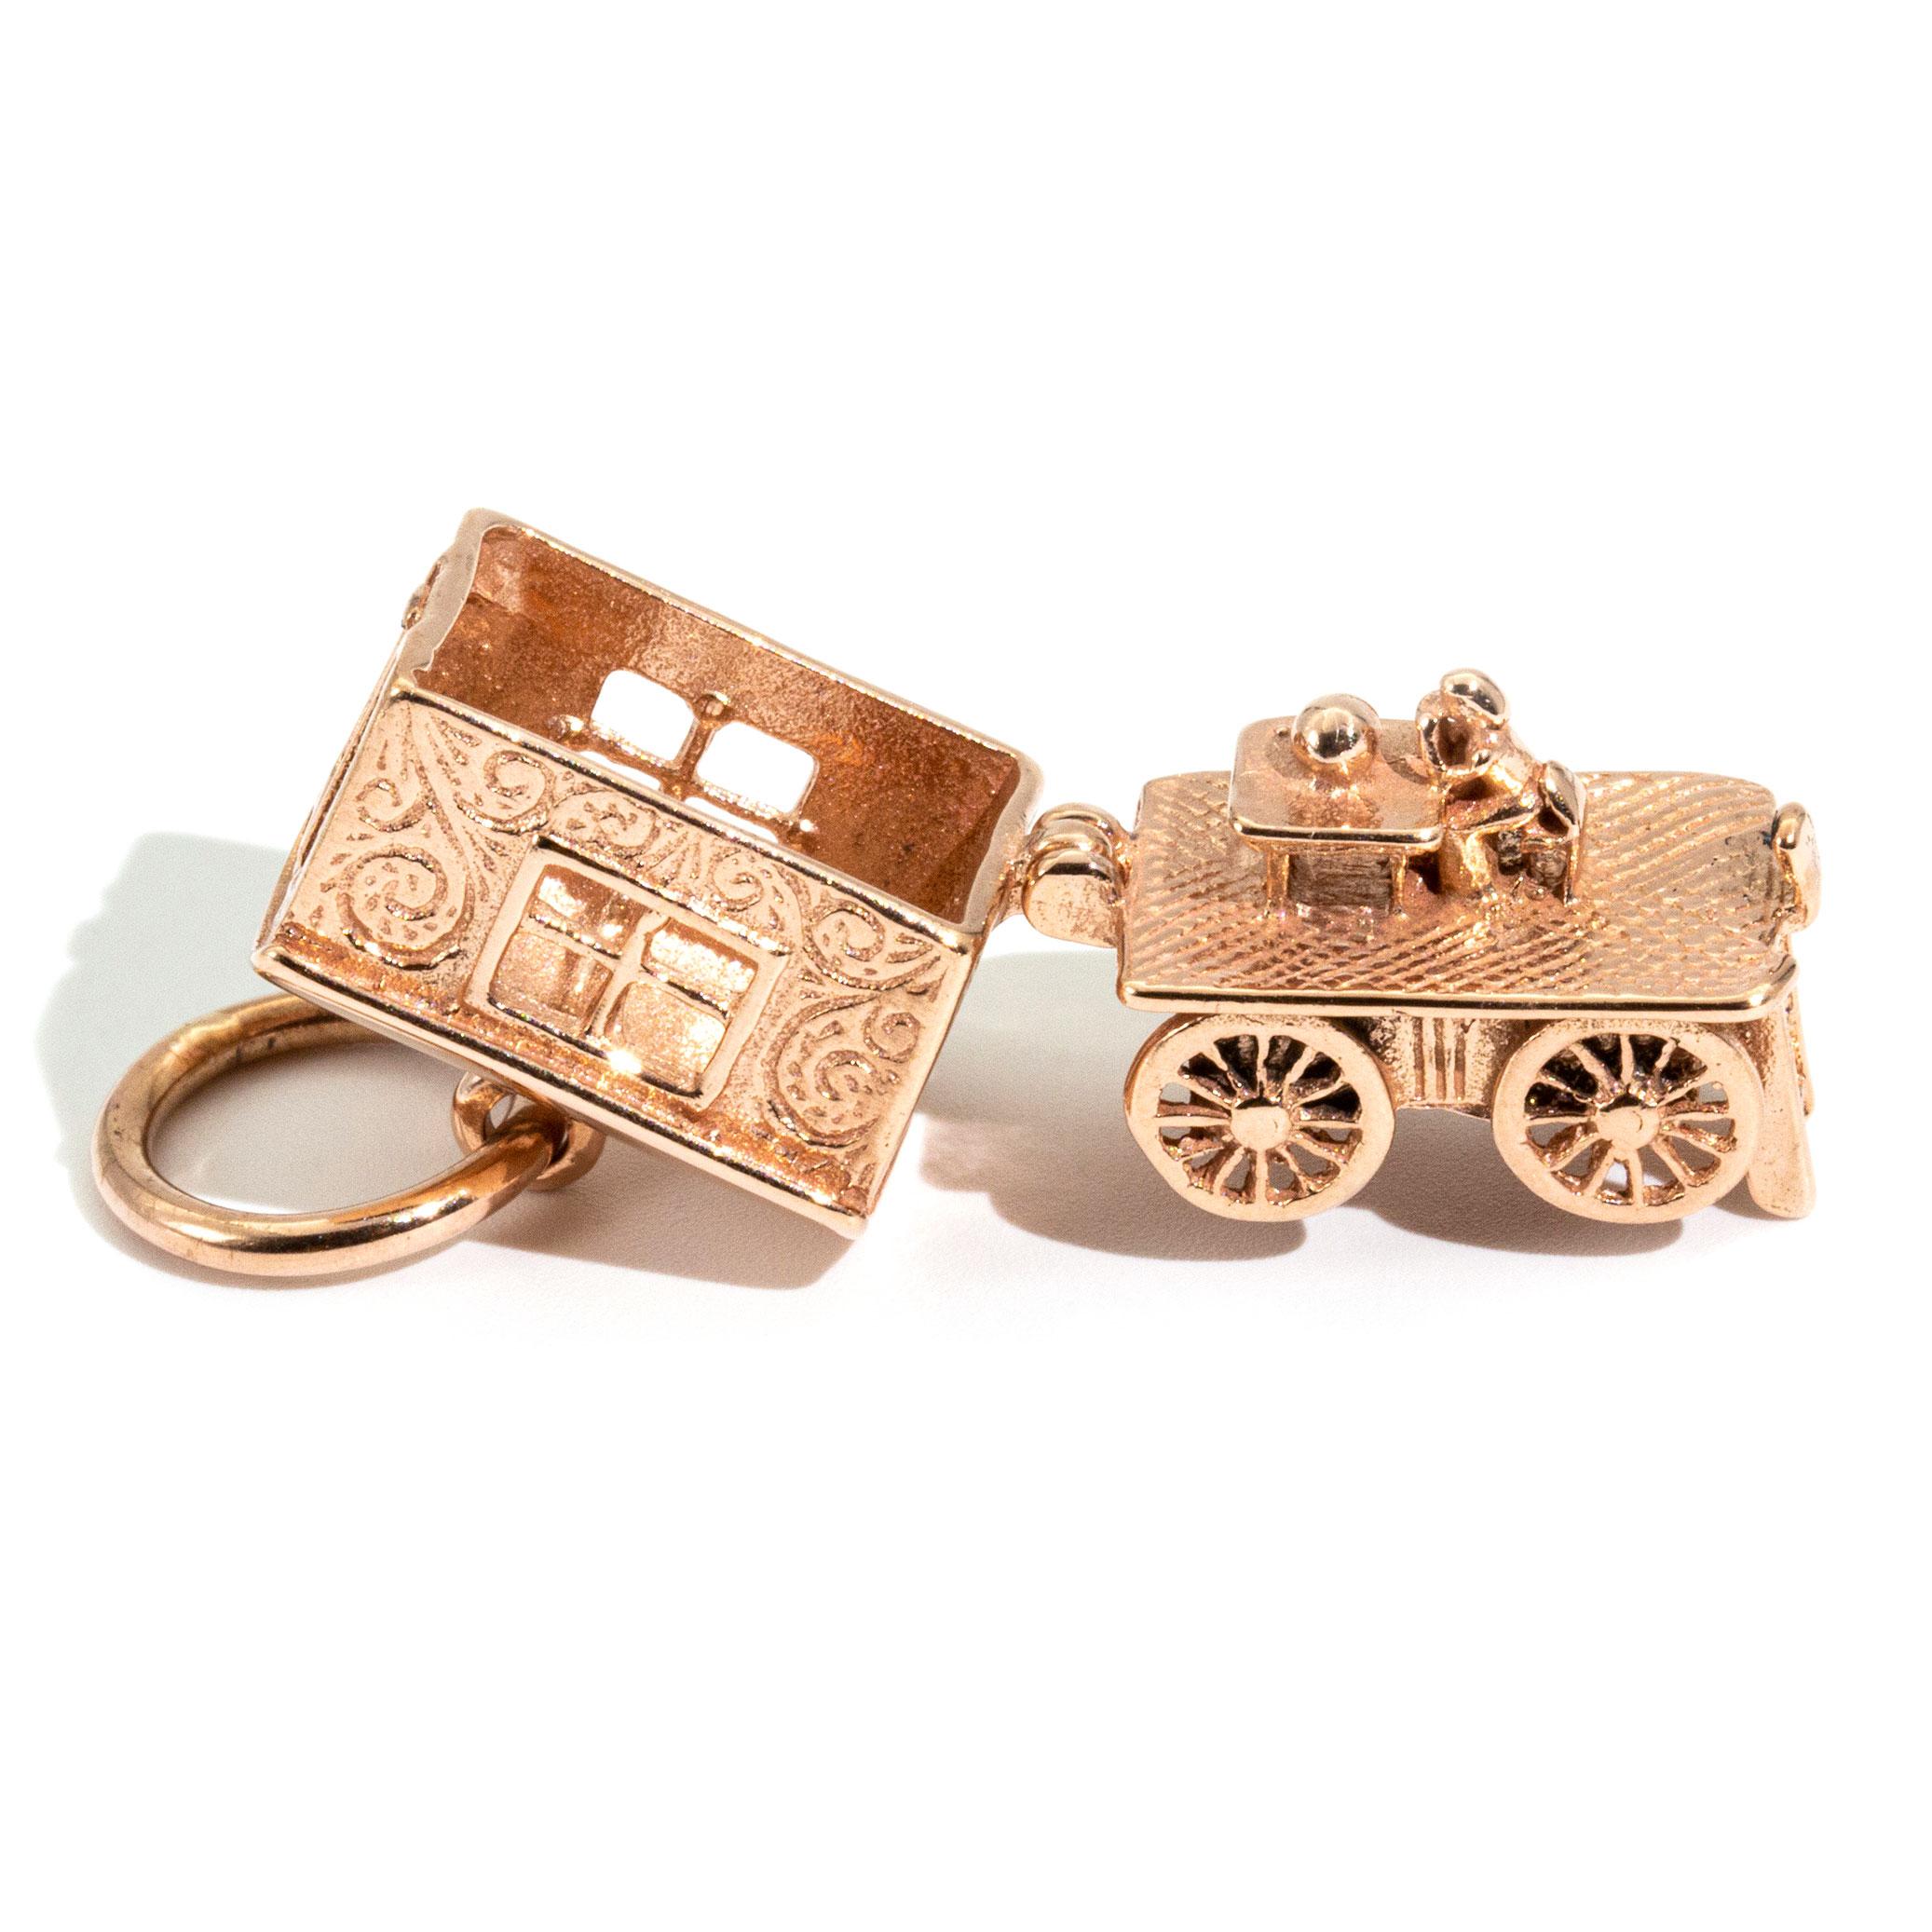 Women's or Men's 9 Carat Rose Gold Gypsy Carriage Vintage Charm or Pendant